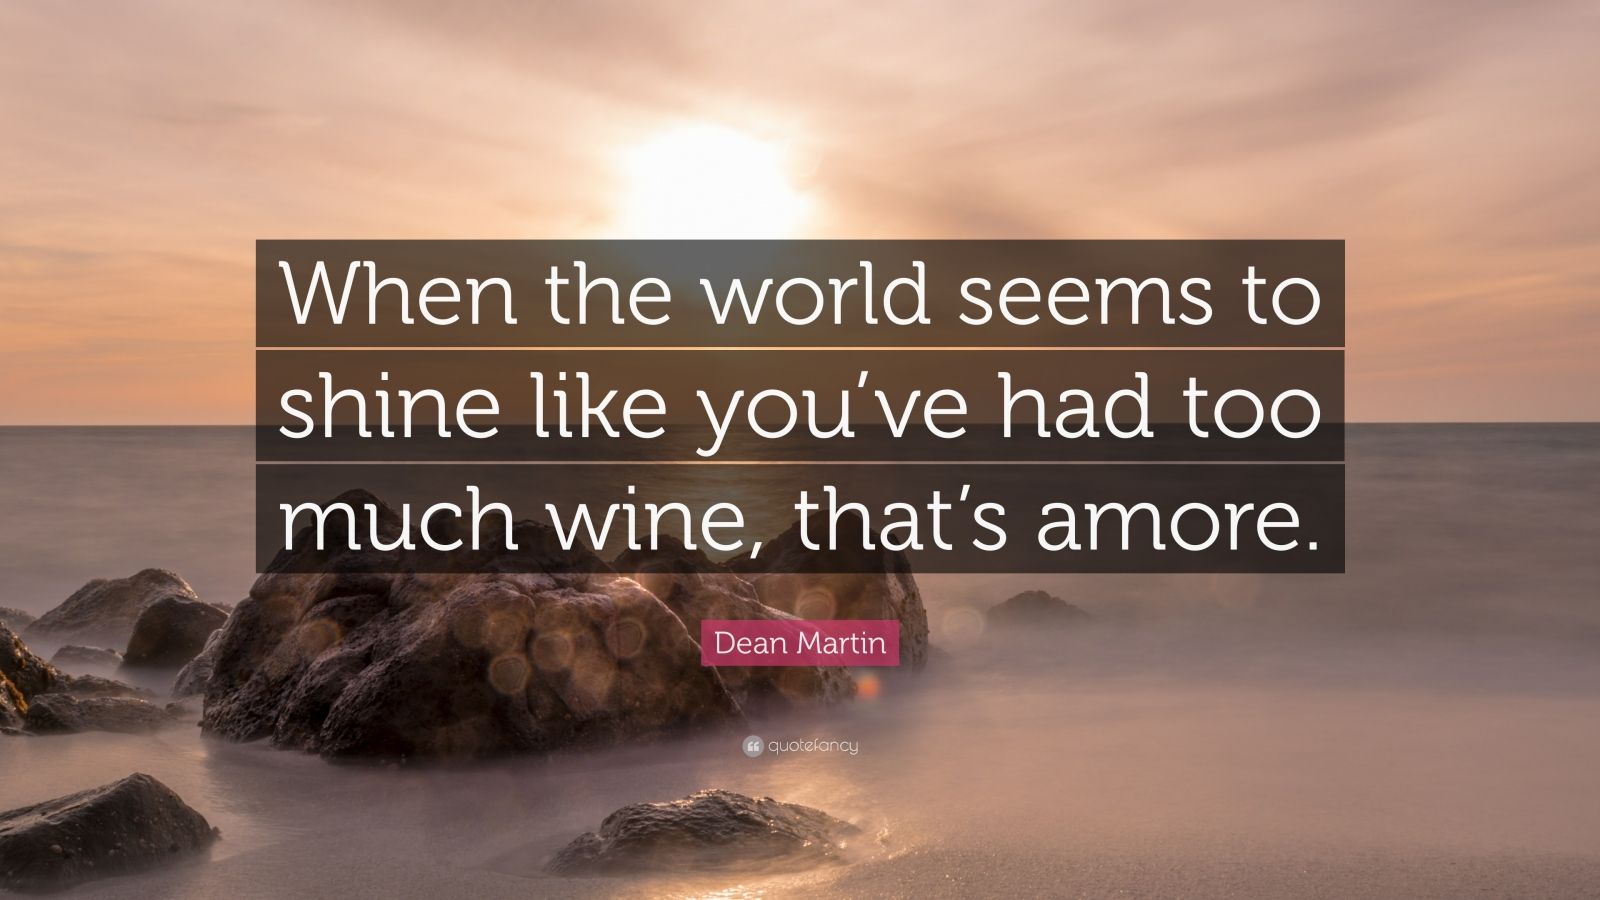 Dean Martin Quote: “When the world seems to shine like you’ve had too much wine, that’s amore.”